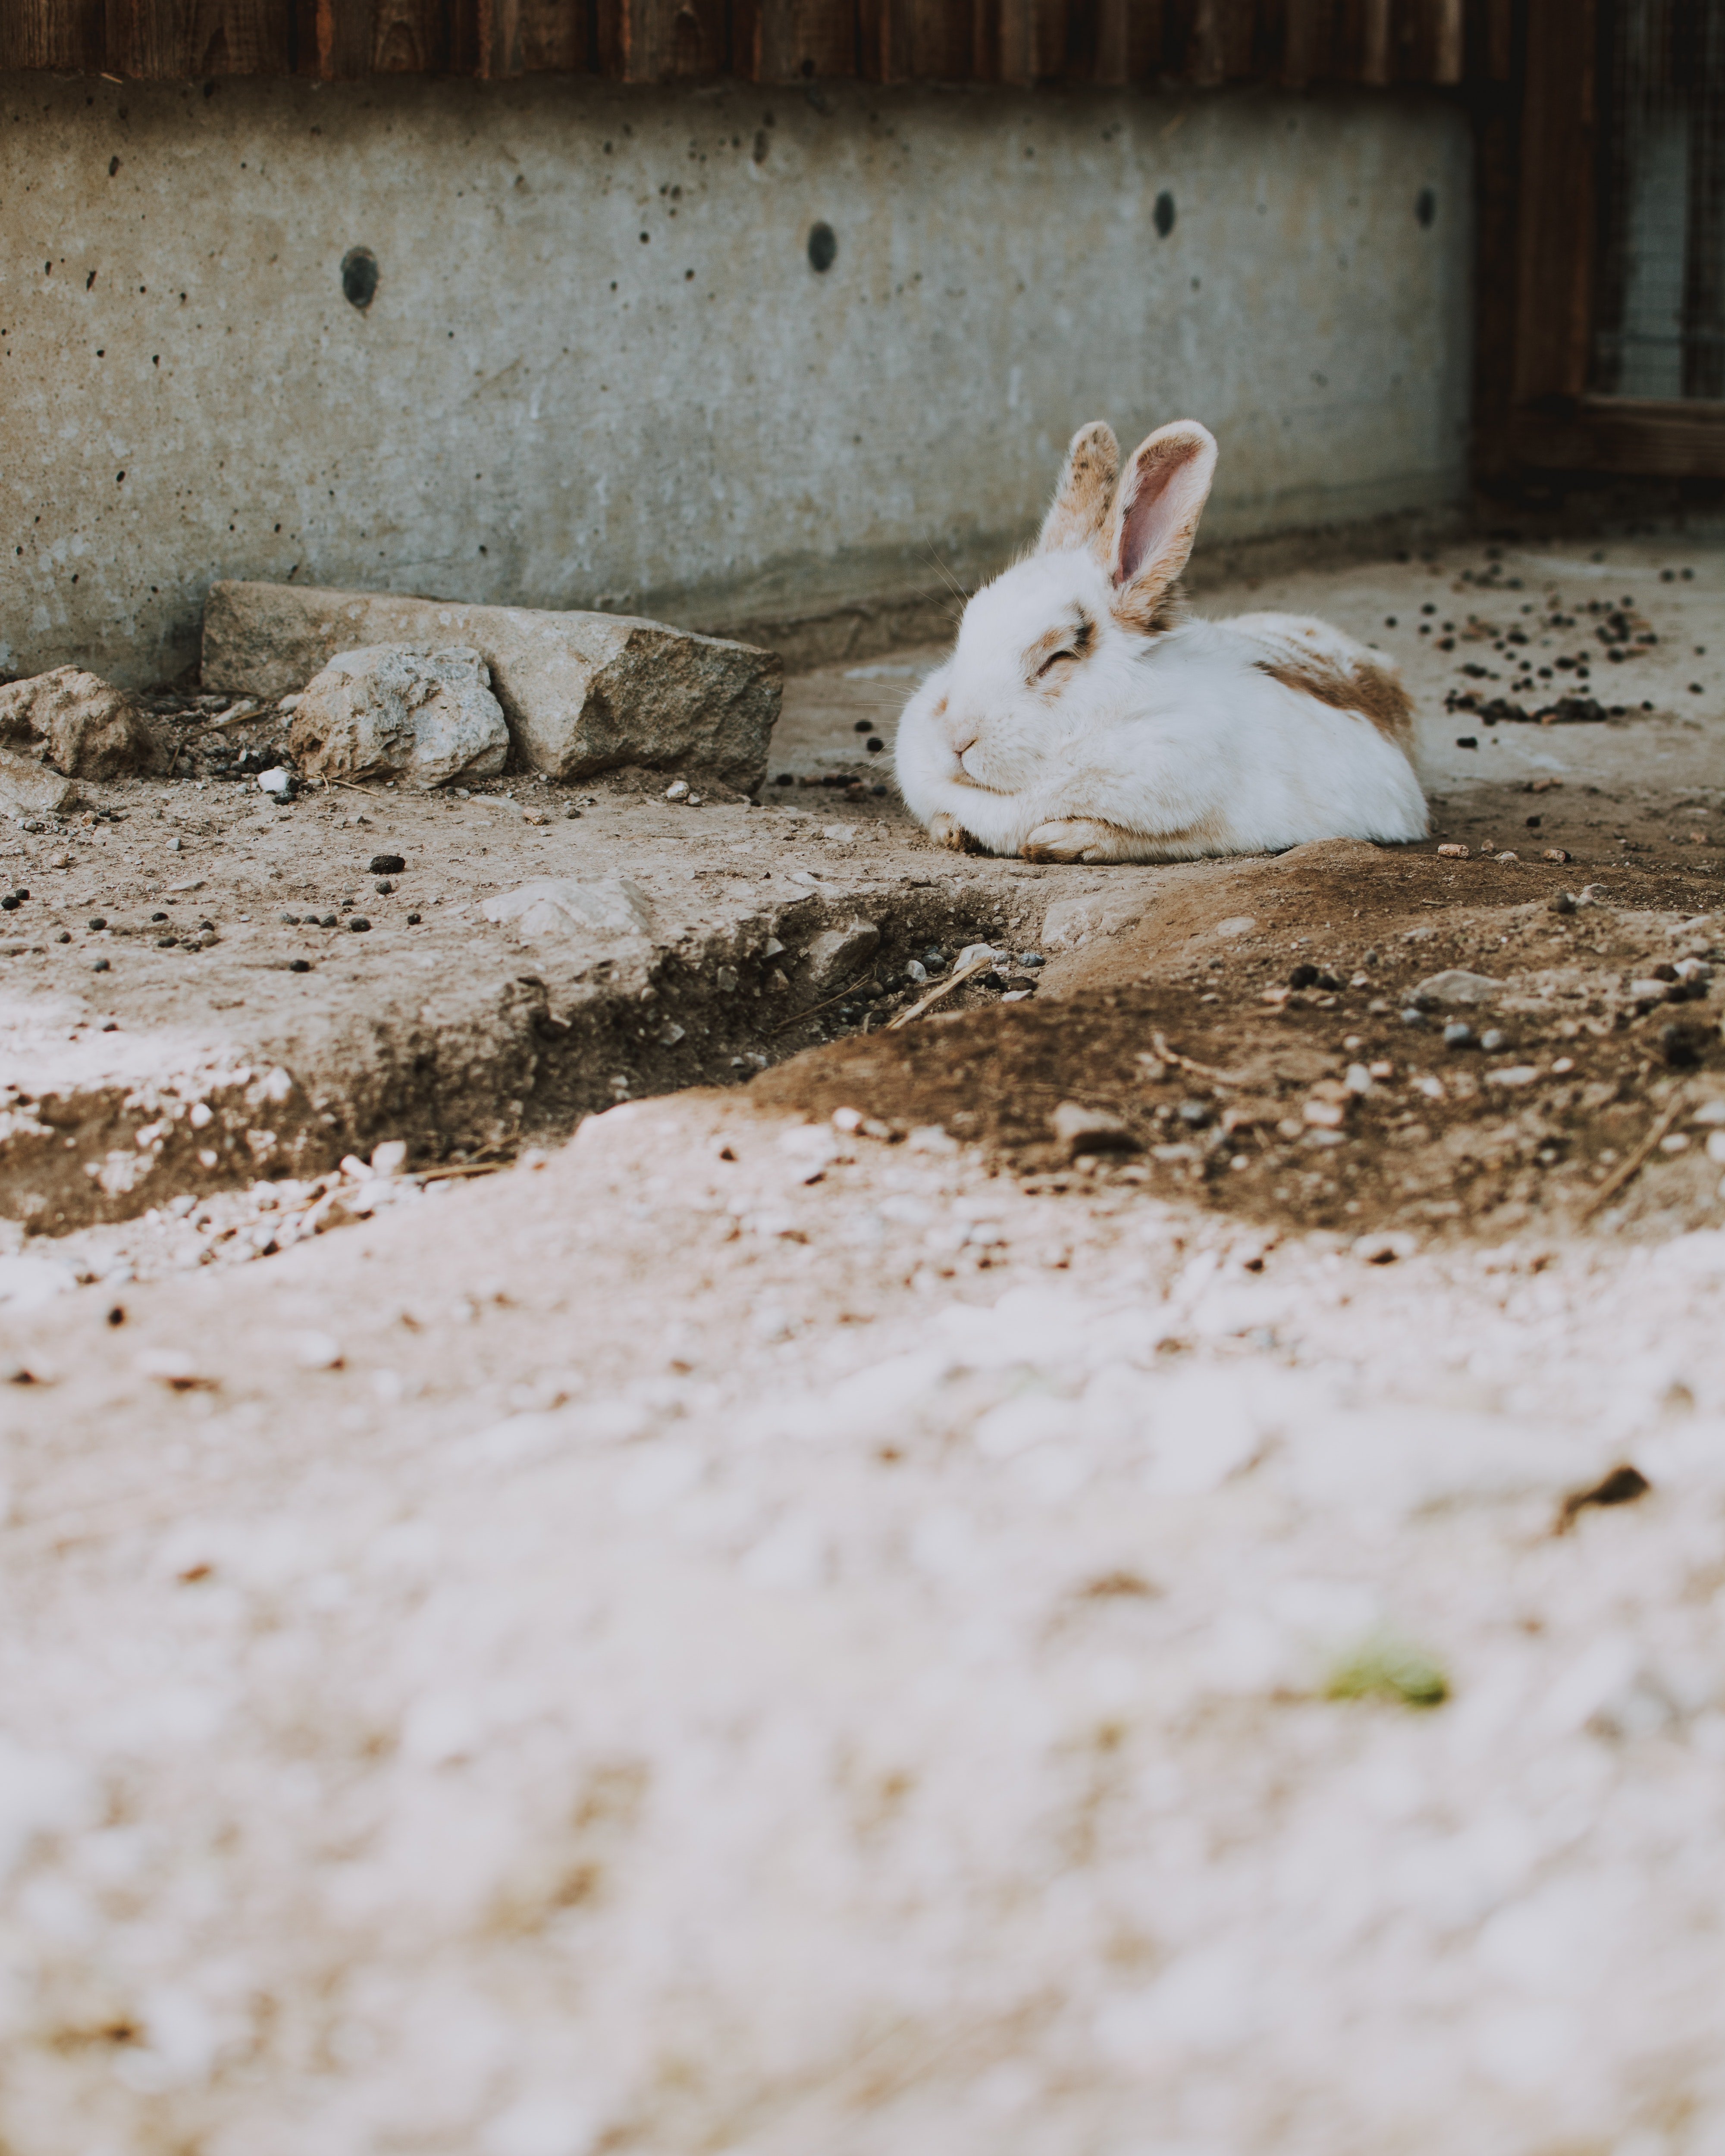 A white rabbit lying on the ground. | Photo: Pexels/fotografierende